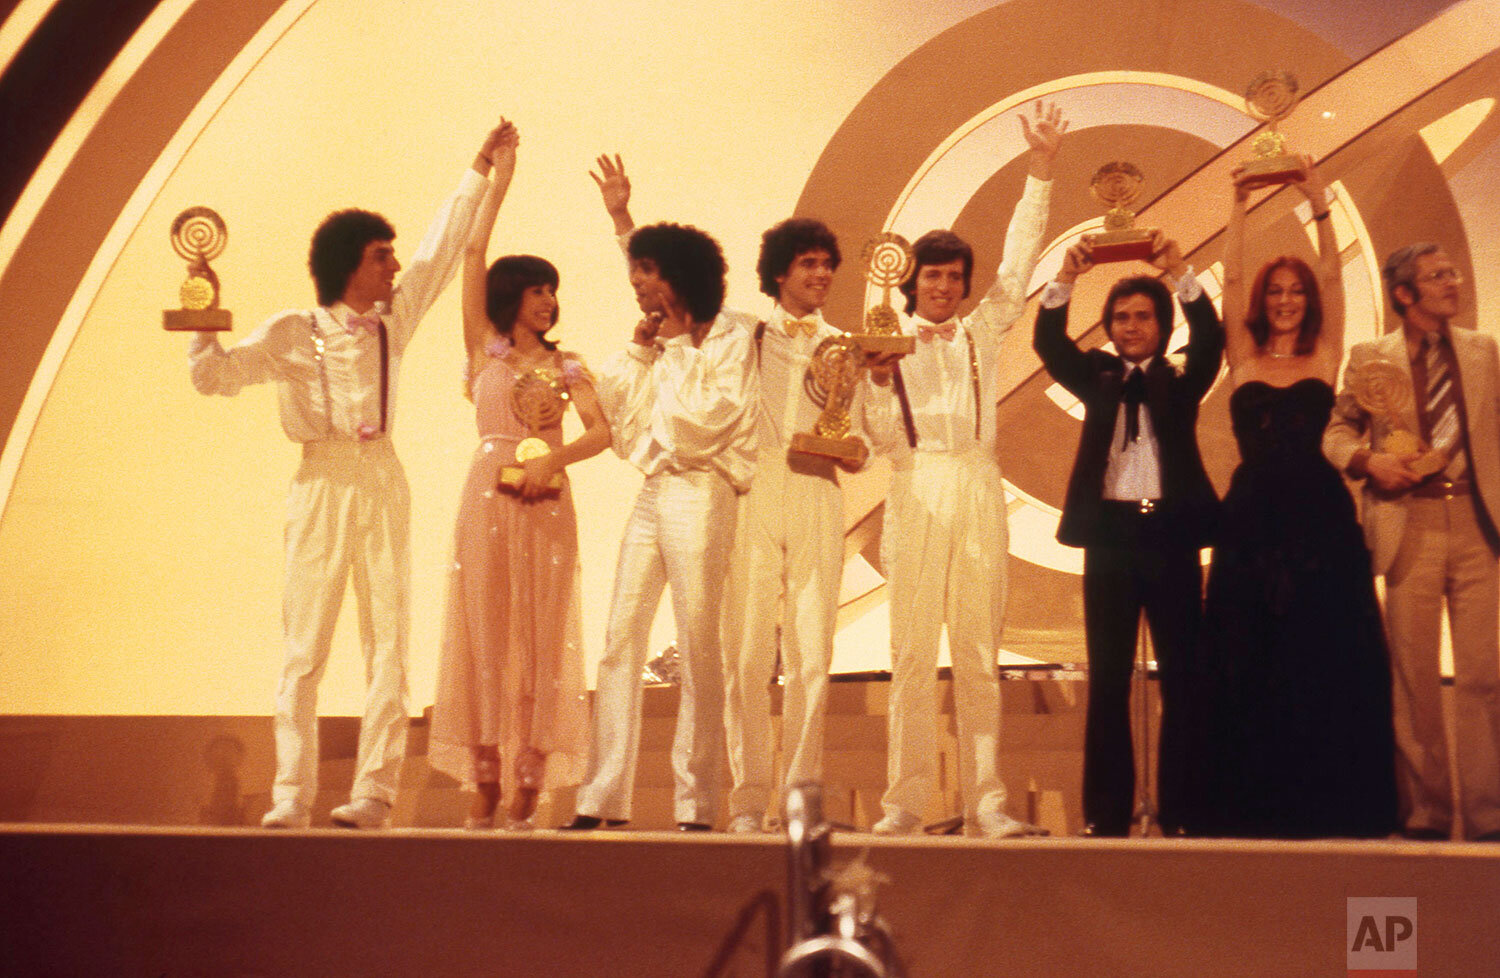  Israel's Milk and Honey and Gali Atari celebrate after their win in the annual Eurovision Song Contest in Jerusalem on March 31, 1979. (AP Photo/Aristotle Sariscostas) 